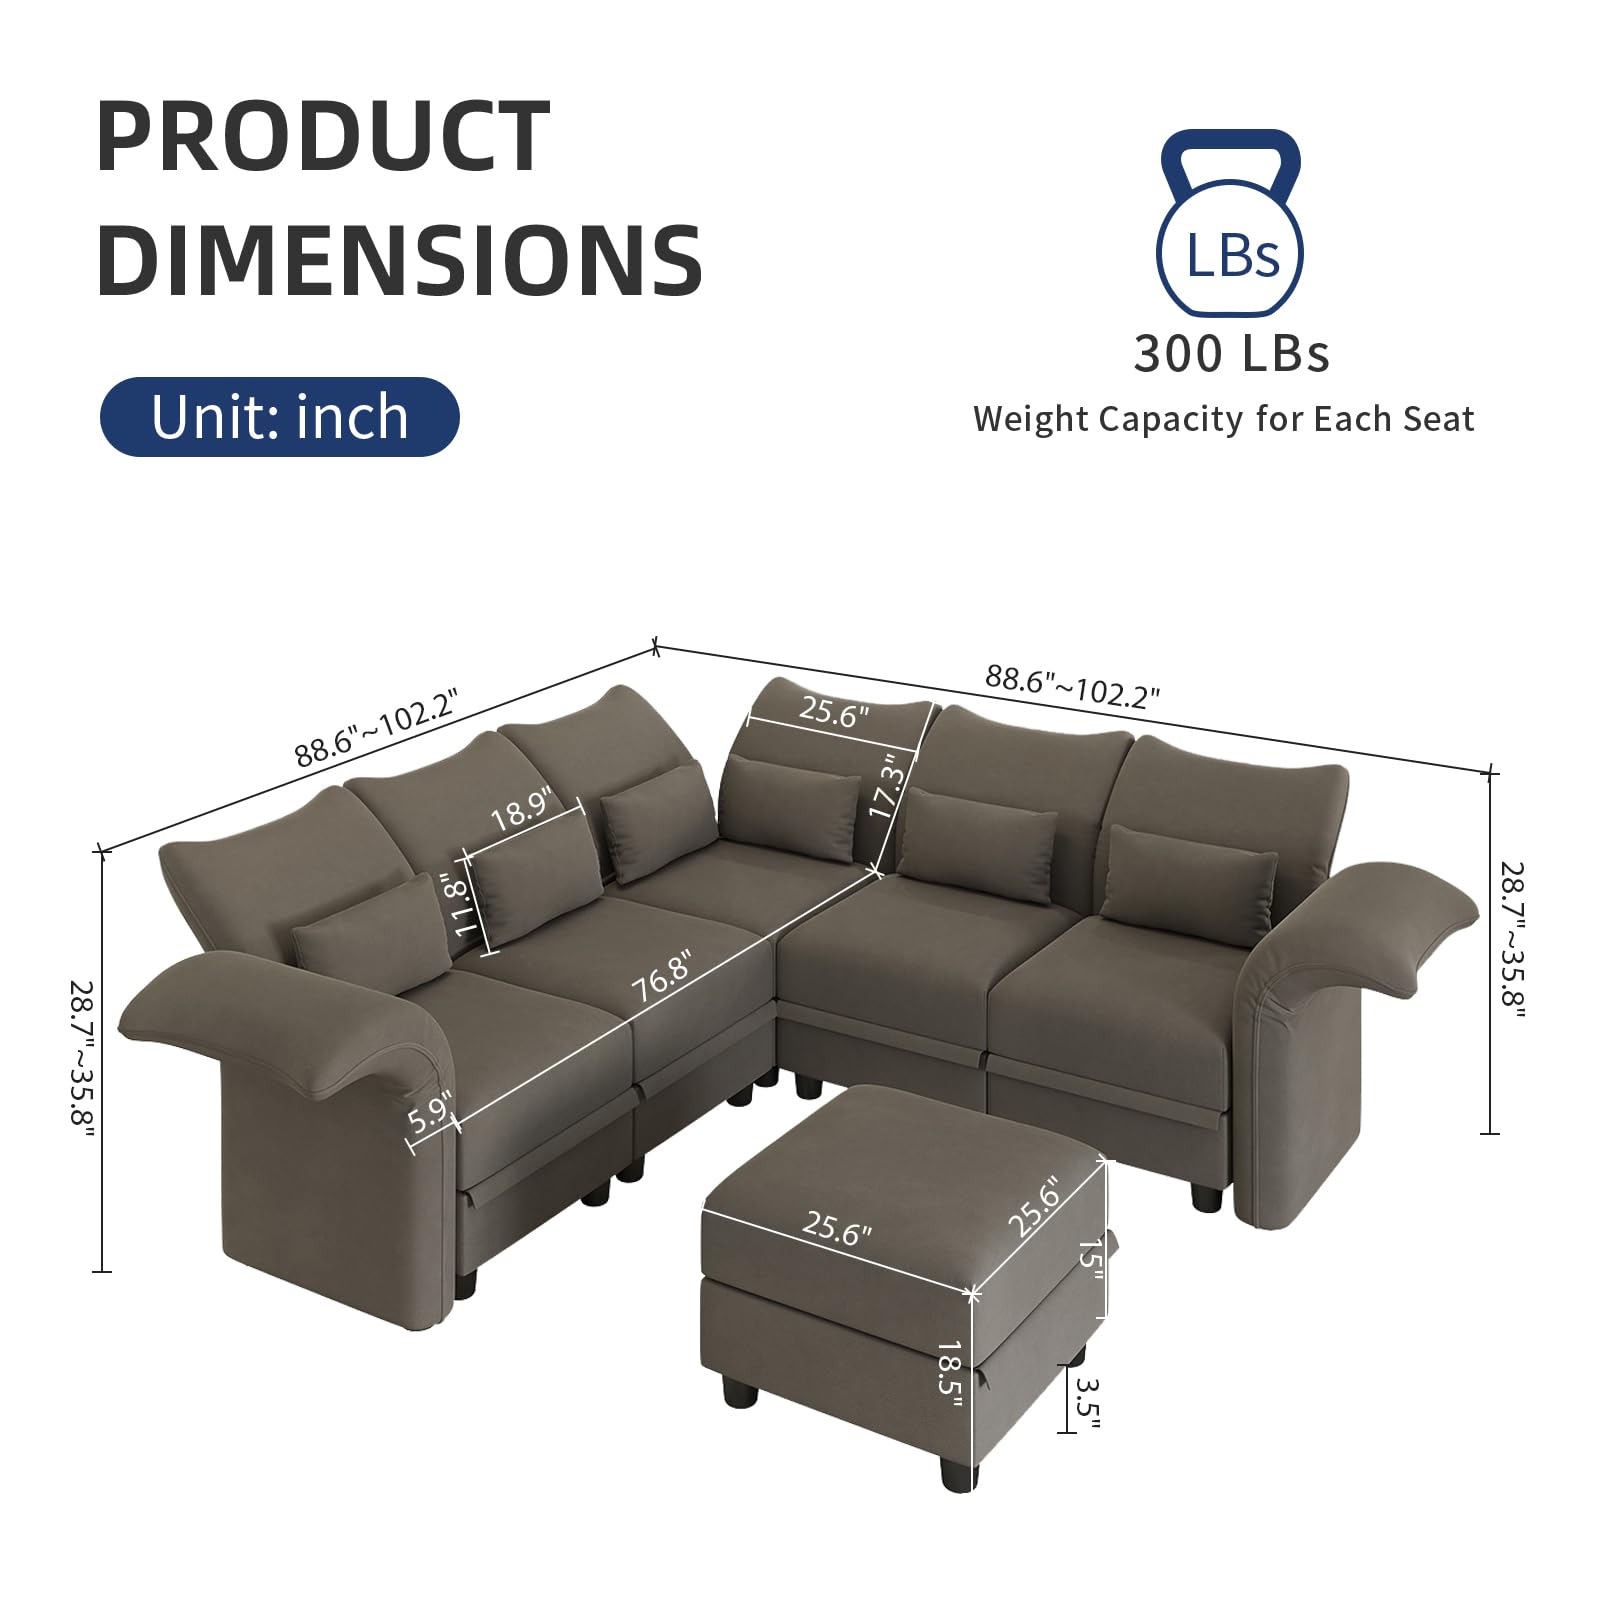 LLappuil Velvet Modular Sectional Sofa L Shaped Corner Couch with Storage Chaise, 102.2" 6-Seater Oversized Sofa with Ottoman, High Back Recliner Sleeper Couches, Anti-Scratch Brown